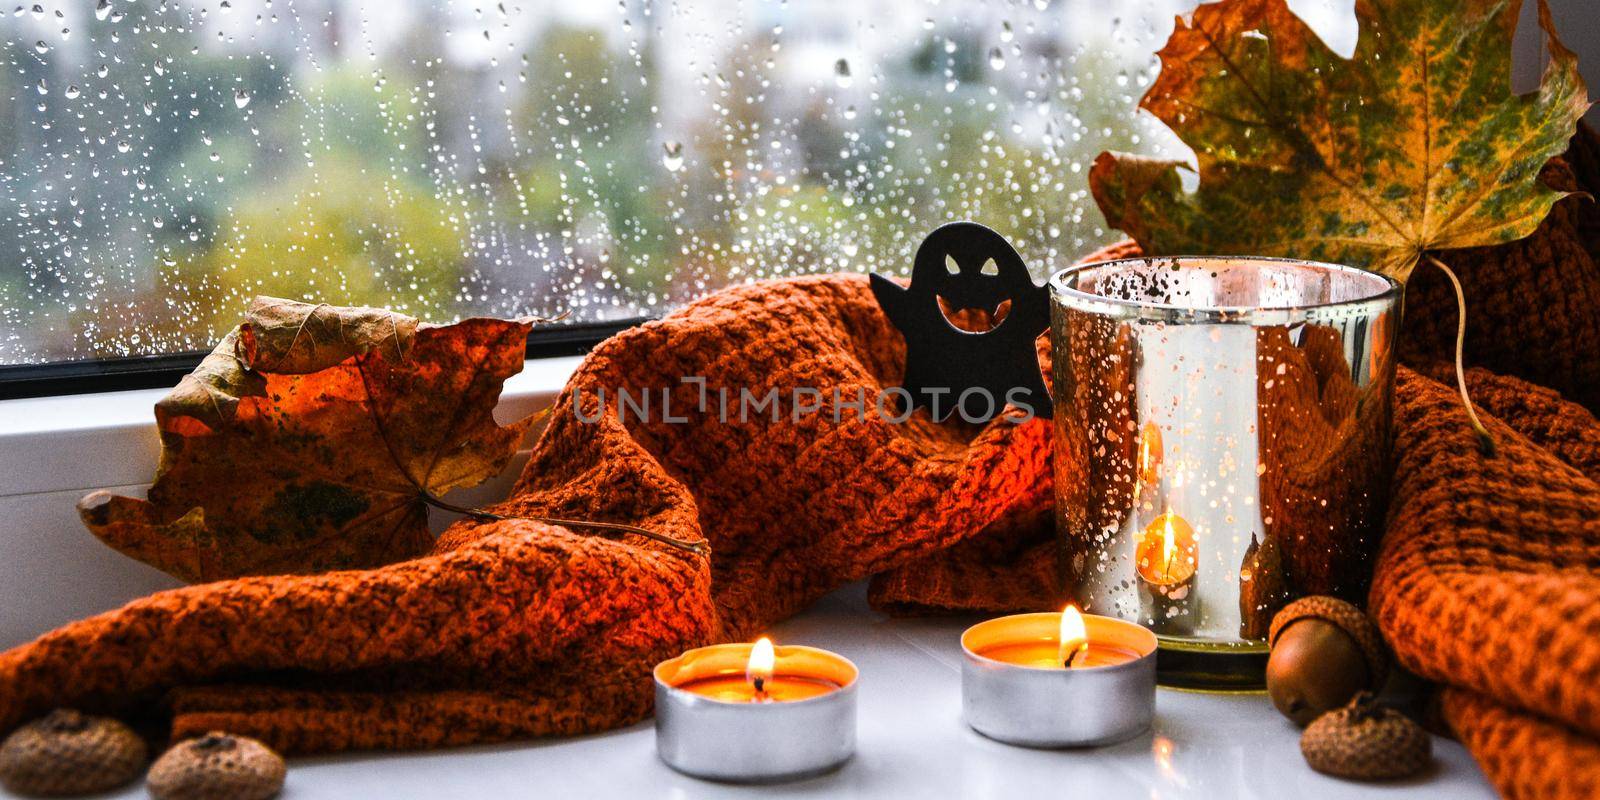 Candles with sweater and ghost pumpkin, dried leaves on windowsill. Halloween home decoration. Rainy window. by anna_stasiia